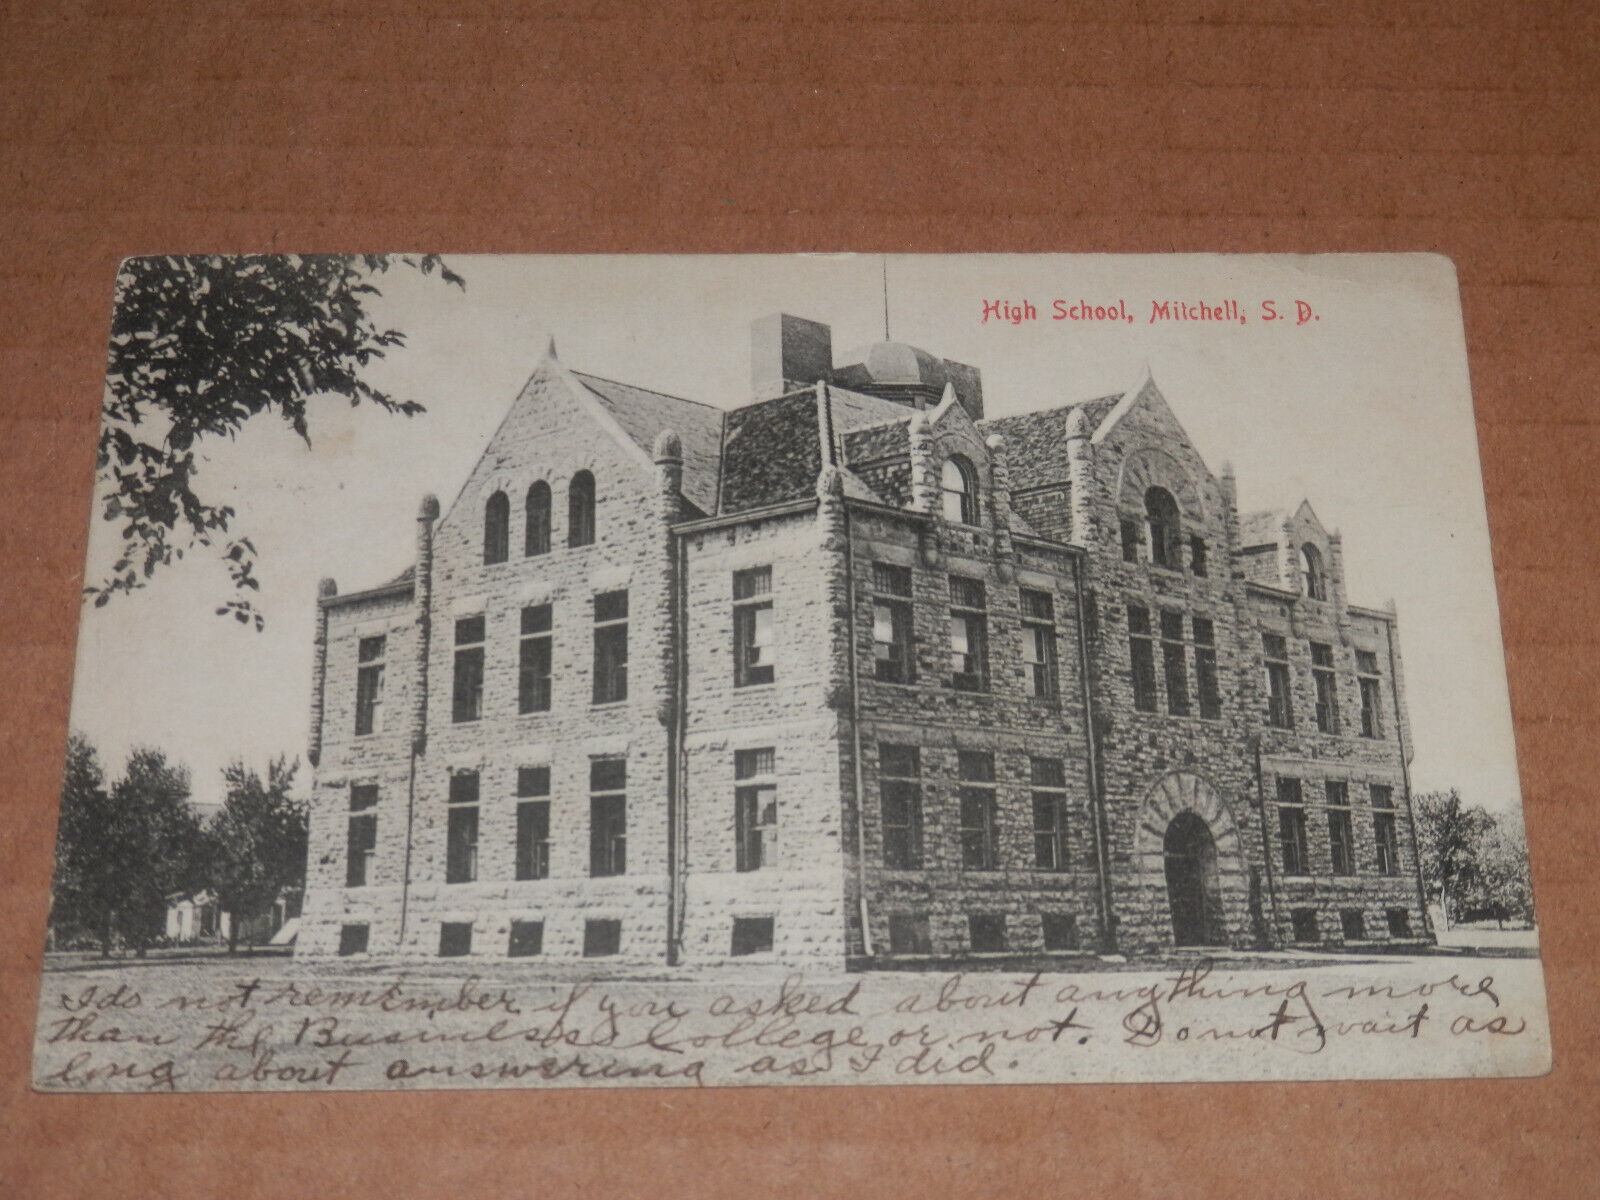 MITCHELL SD - 1909 POSTED POSTCARD - HIGH SCHOOL - To CLARK SD